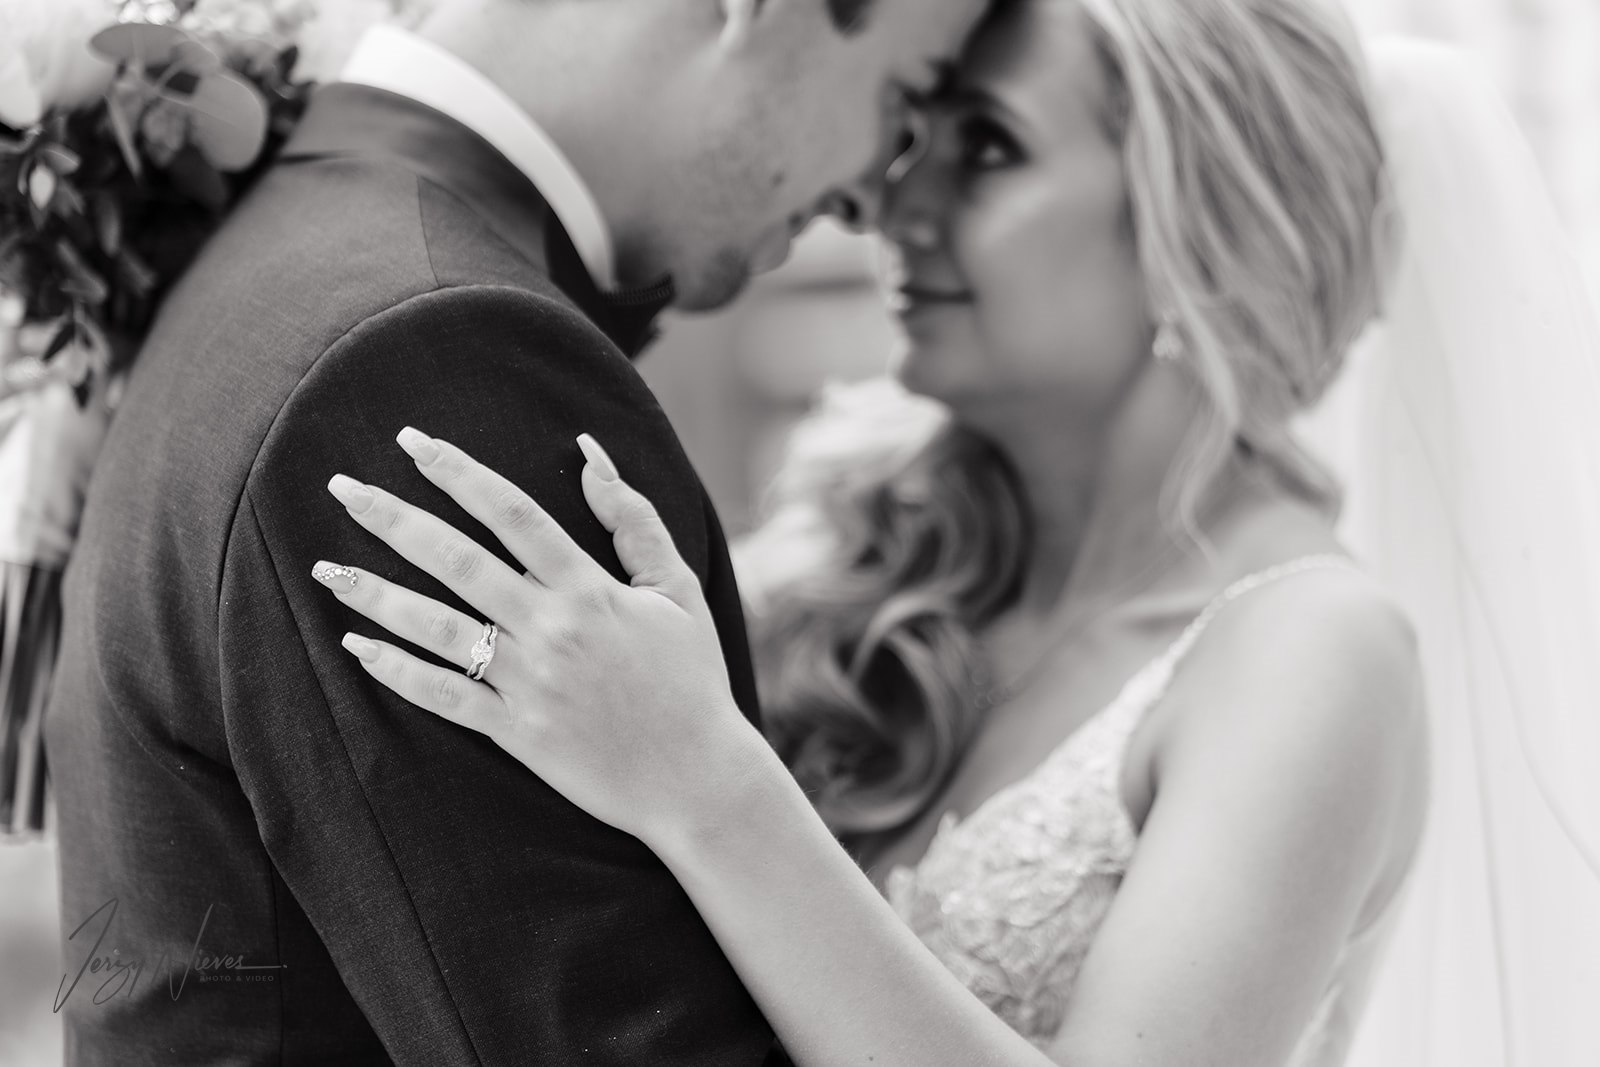 Black and white photo of the newlyweds touching foreheads while dancing, focusing on the bride's hands with her wedding bands and her hand on his shoulder.